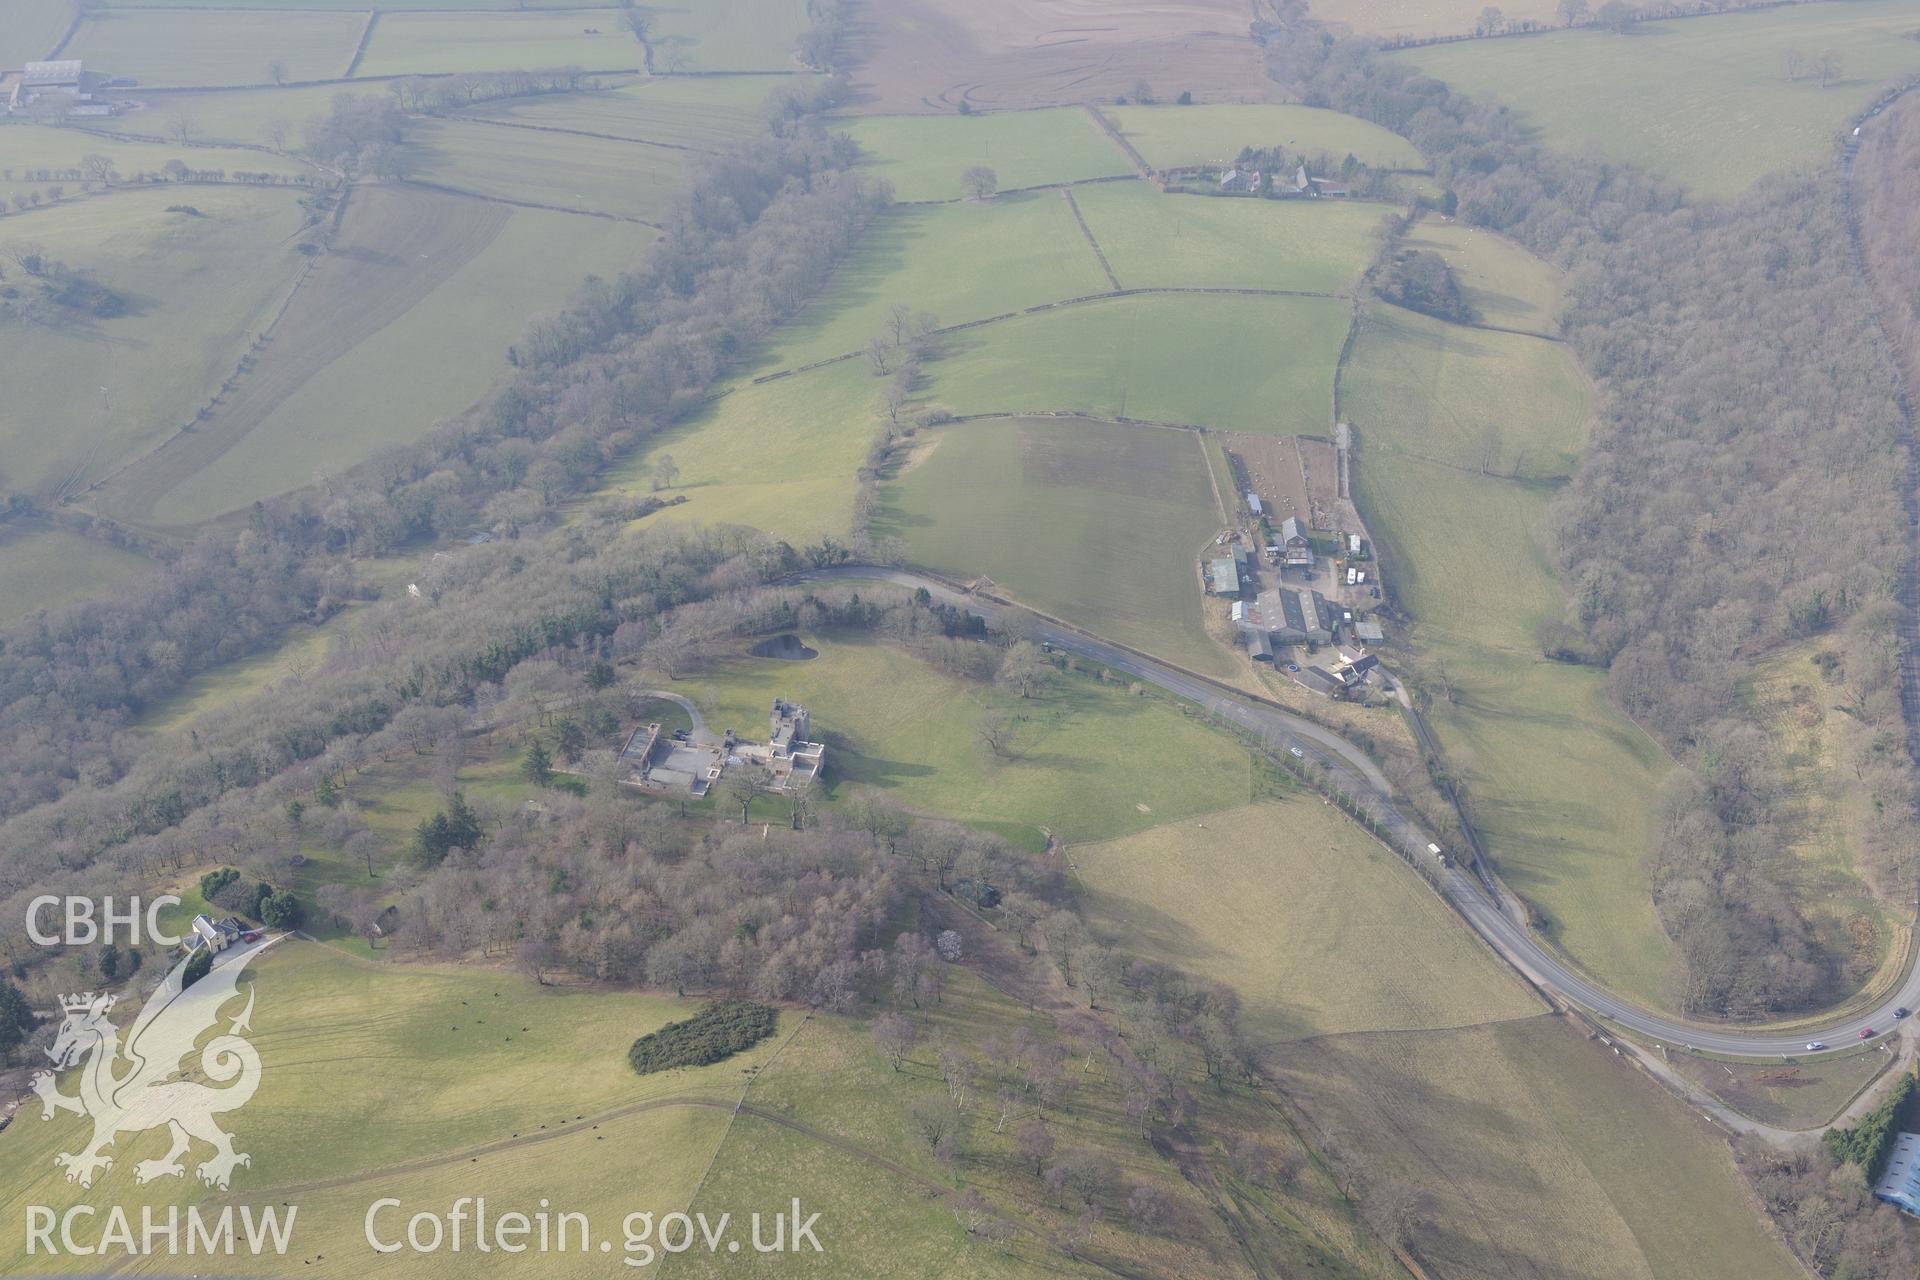 The Clwyd Gate restaurant and roadhouse, and Castell Gyrn house, Llanbedr. Oblique aerial photograph taken during the Royal Commission?s programme of archaeological aerial reconnaissance by Toby Driver on 28th February 2013.